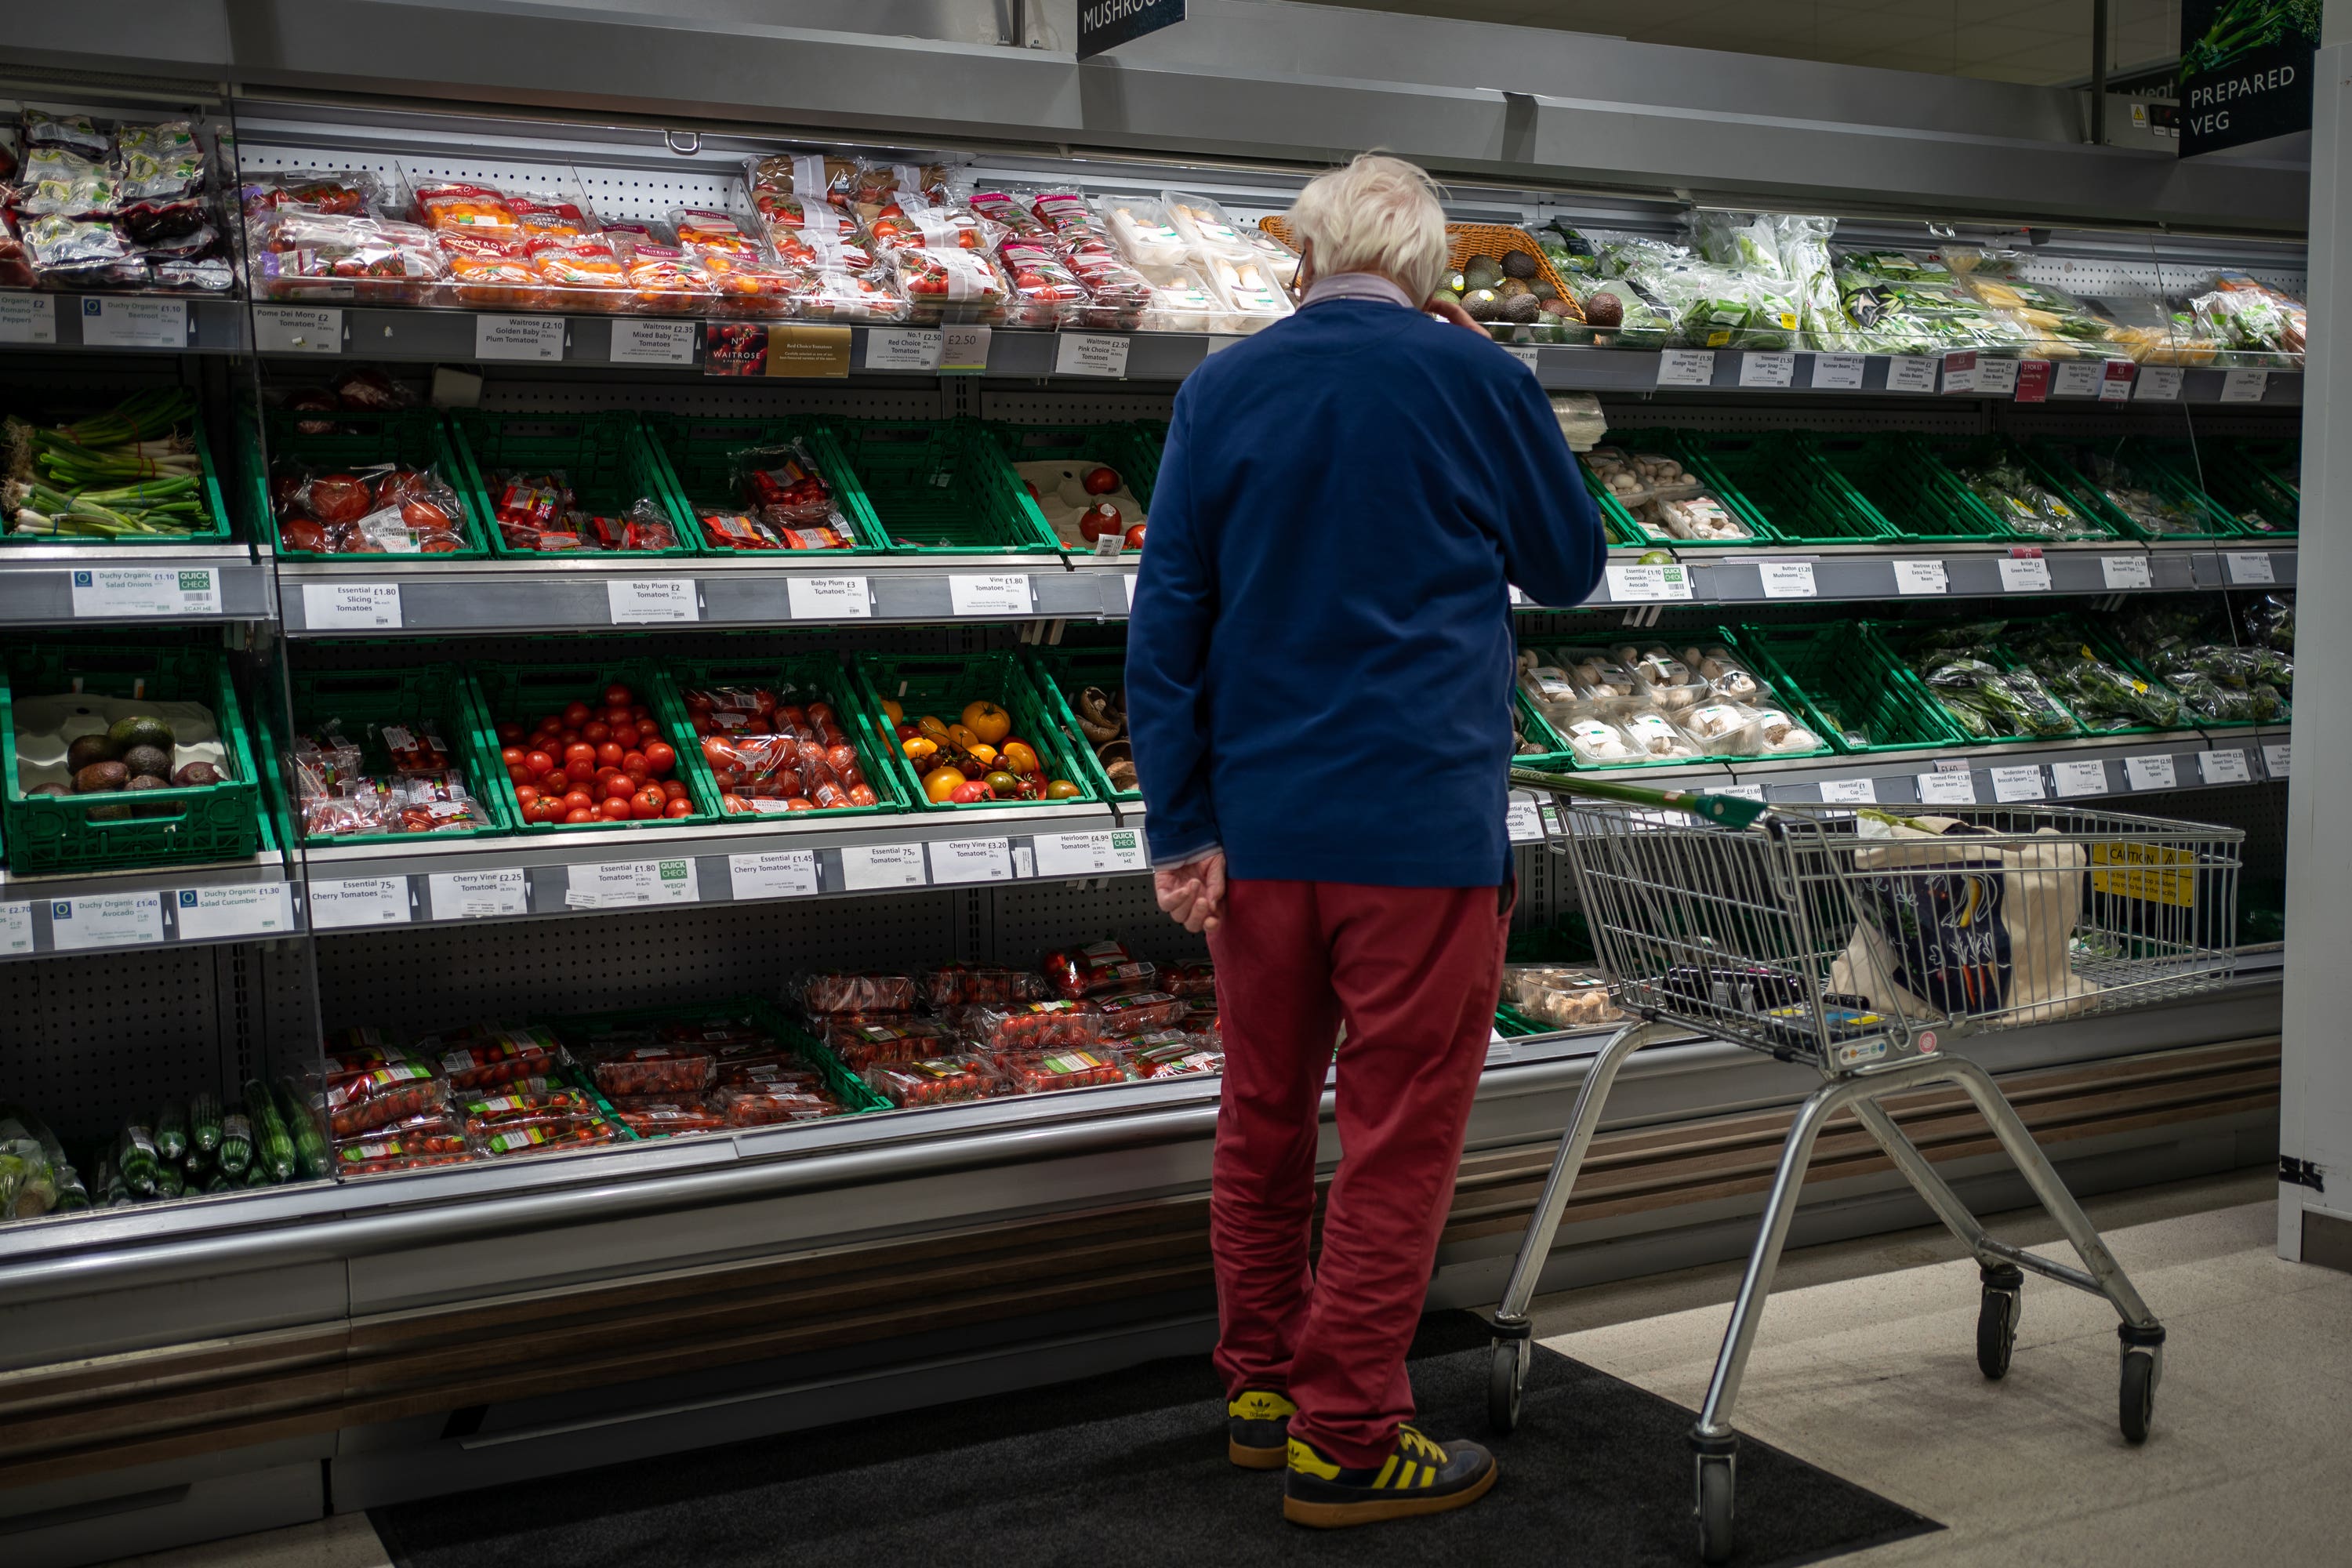 Environment minister Mark Spencer says there are signs food inflation has reached its peak